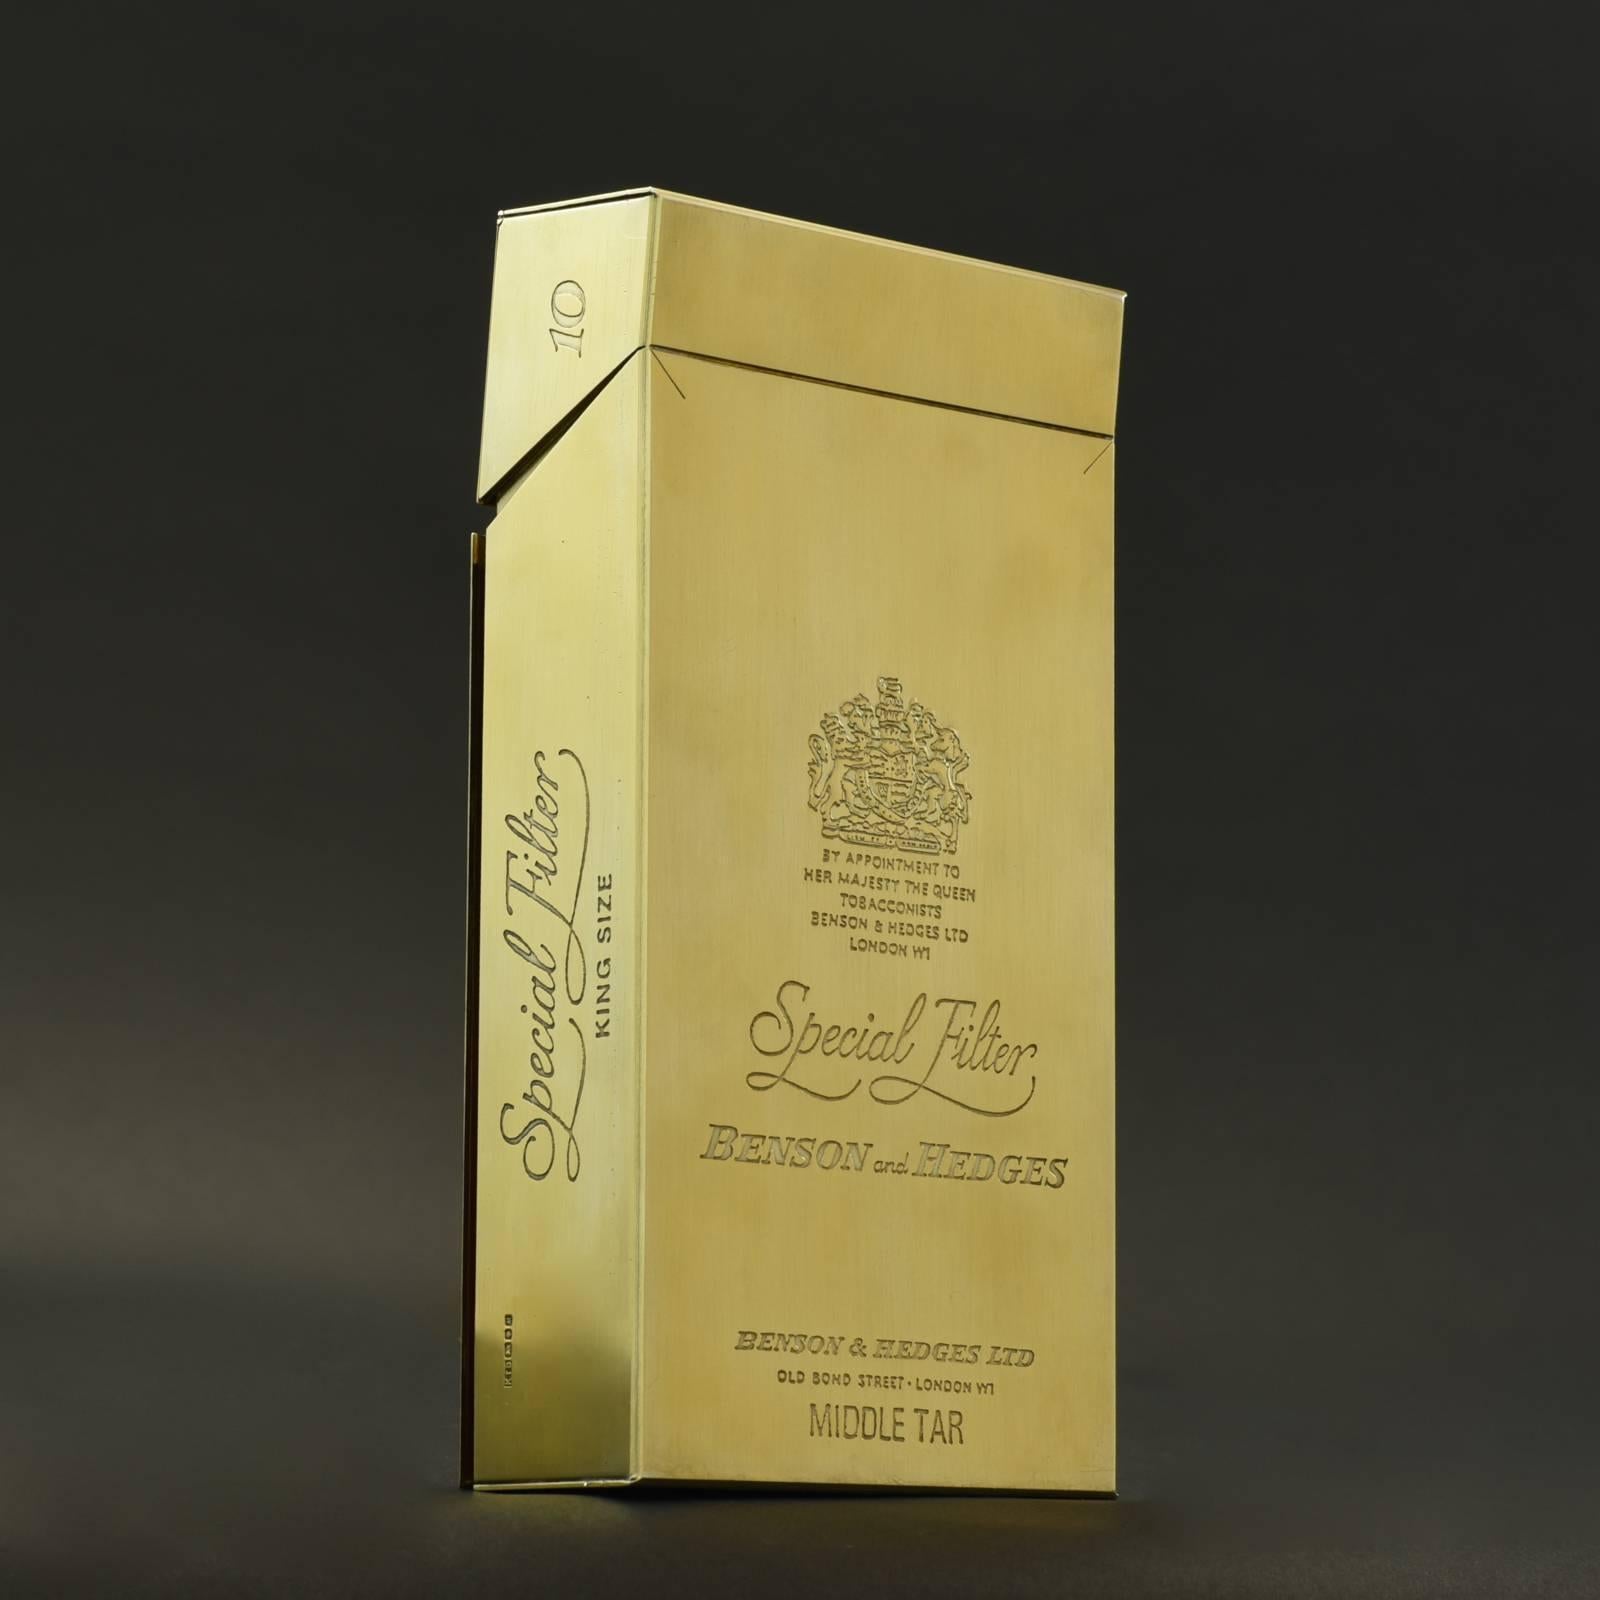 An extraordinary silver-gilt smokers compendium modelled as a Benson and Hedges cigarette packet by Karel Bartosik hallmarked, London, 1986. The box is a scaled up replica of a packet of ten cigarettes engraved and embossed with the logos and